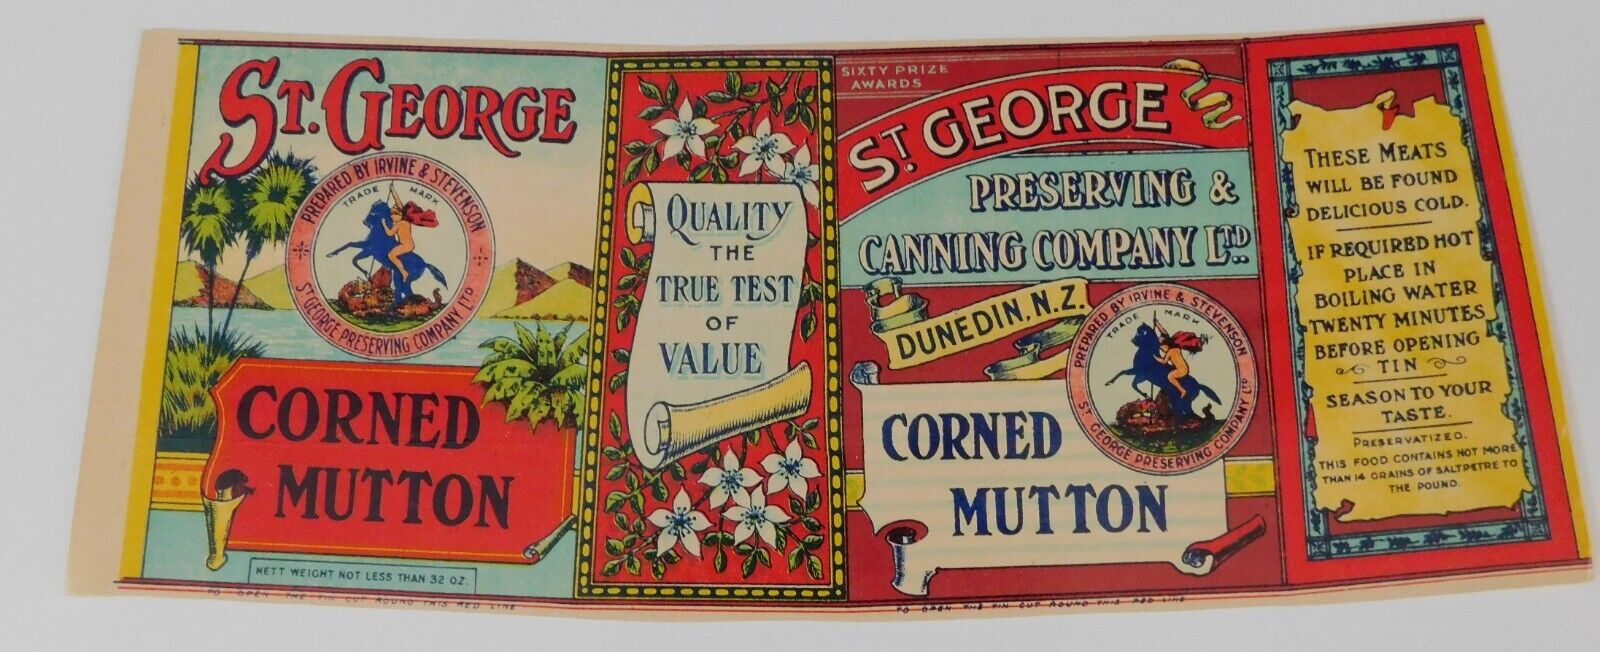 Vintage  St. George Corned Mutton Can Label, New Zealand Circa 1910